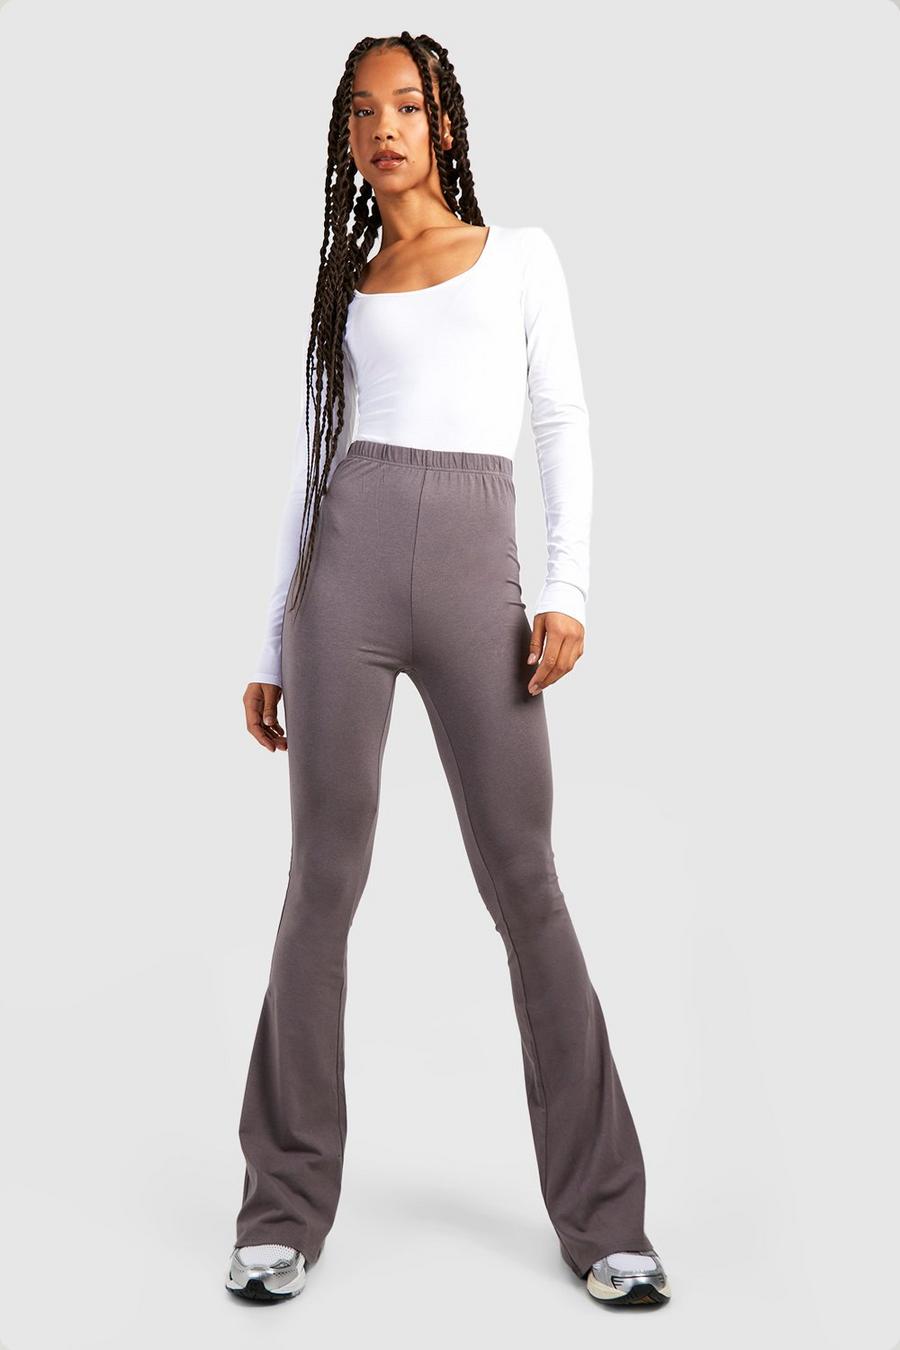 Charcoal gris Tall Premium Super Soft High Waisted Flares